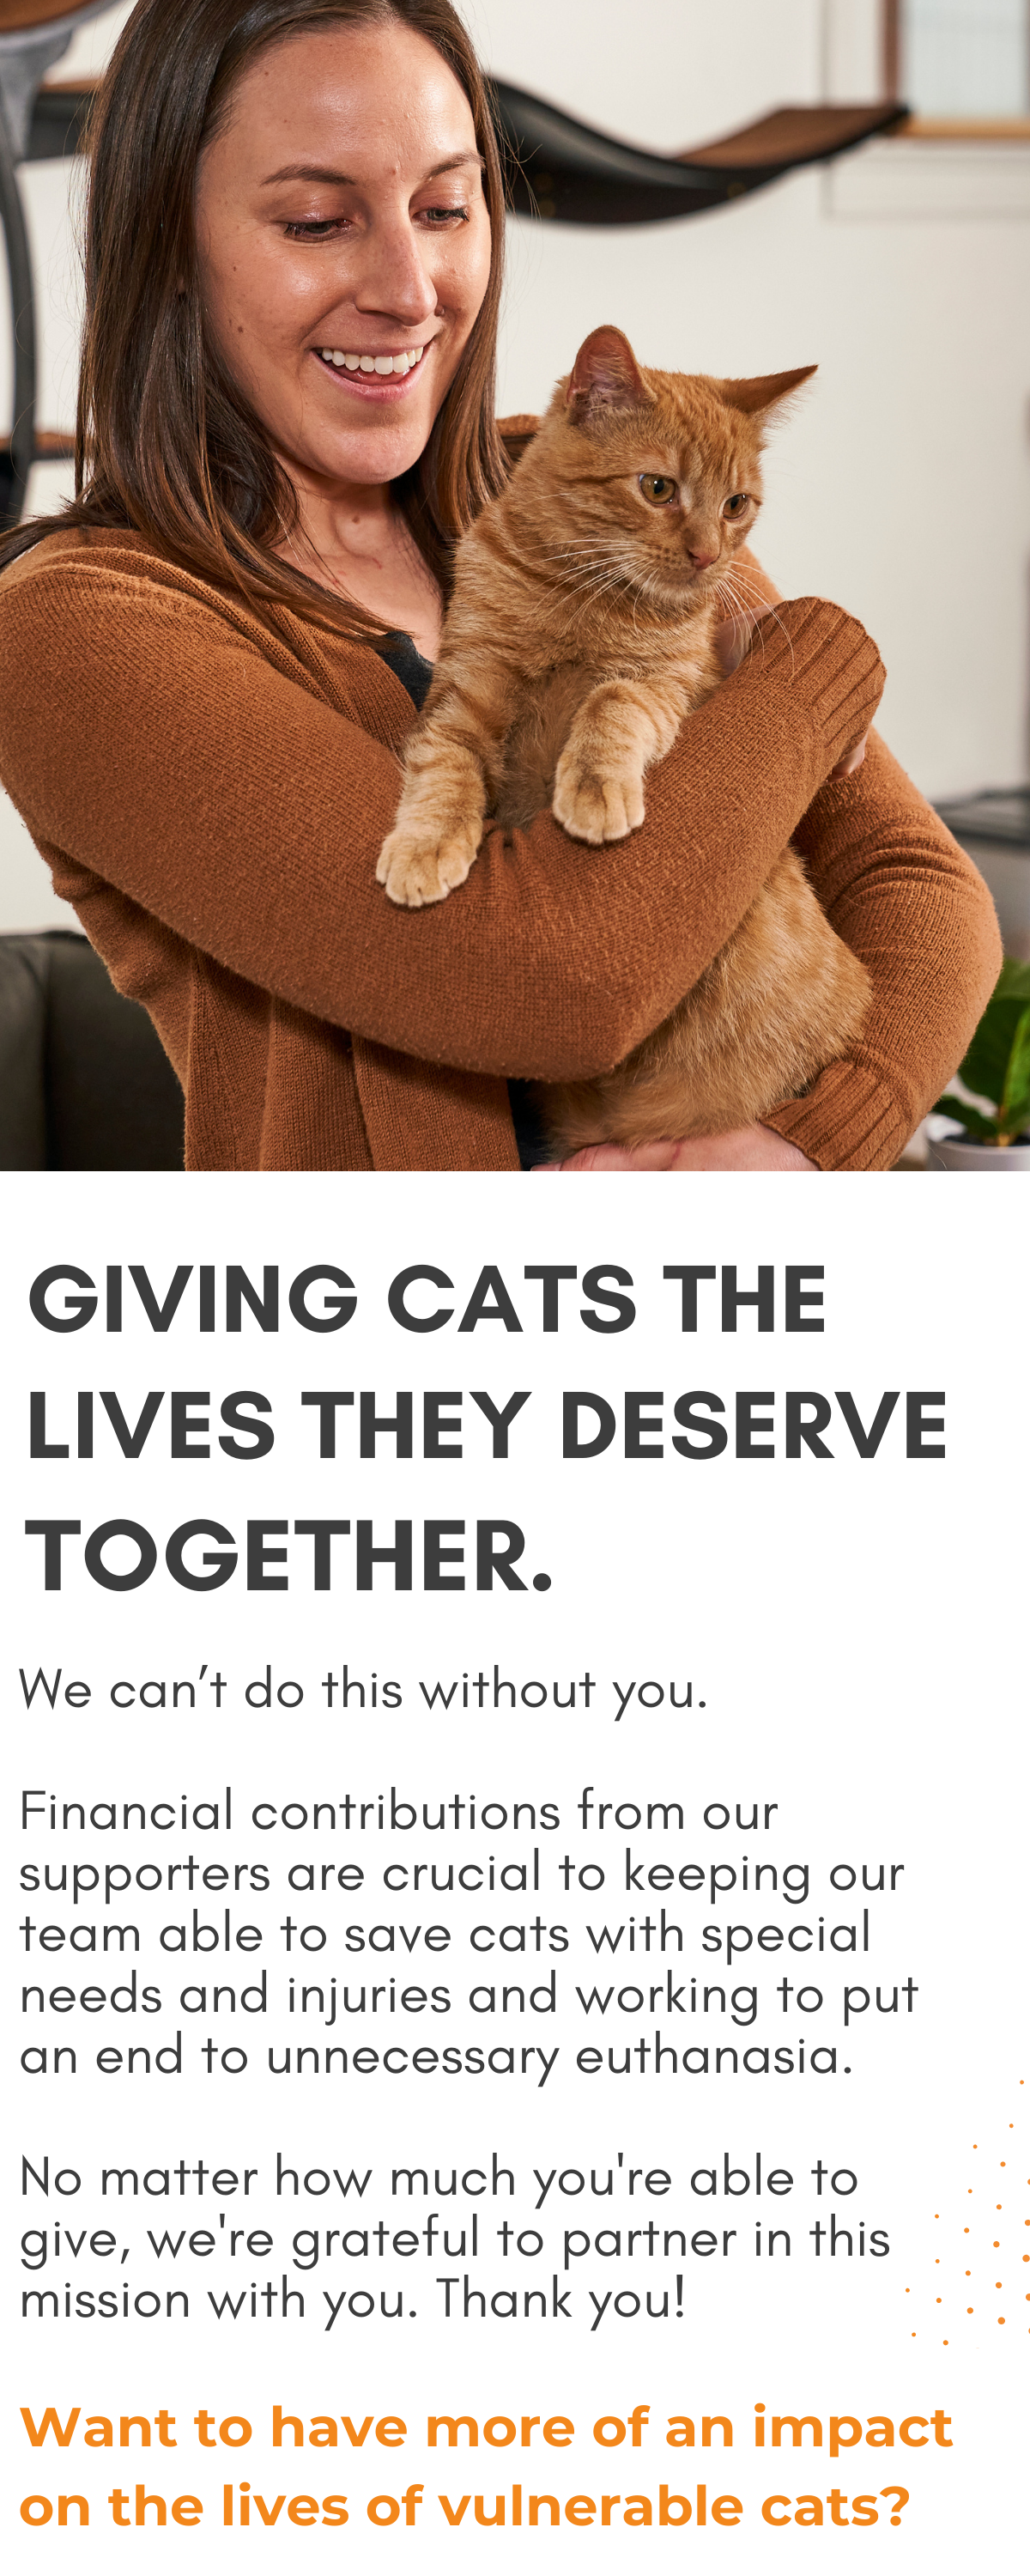 https://www.tenthlifecats.org/mm/images/donate/donate%20page.png